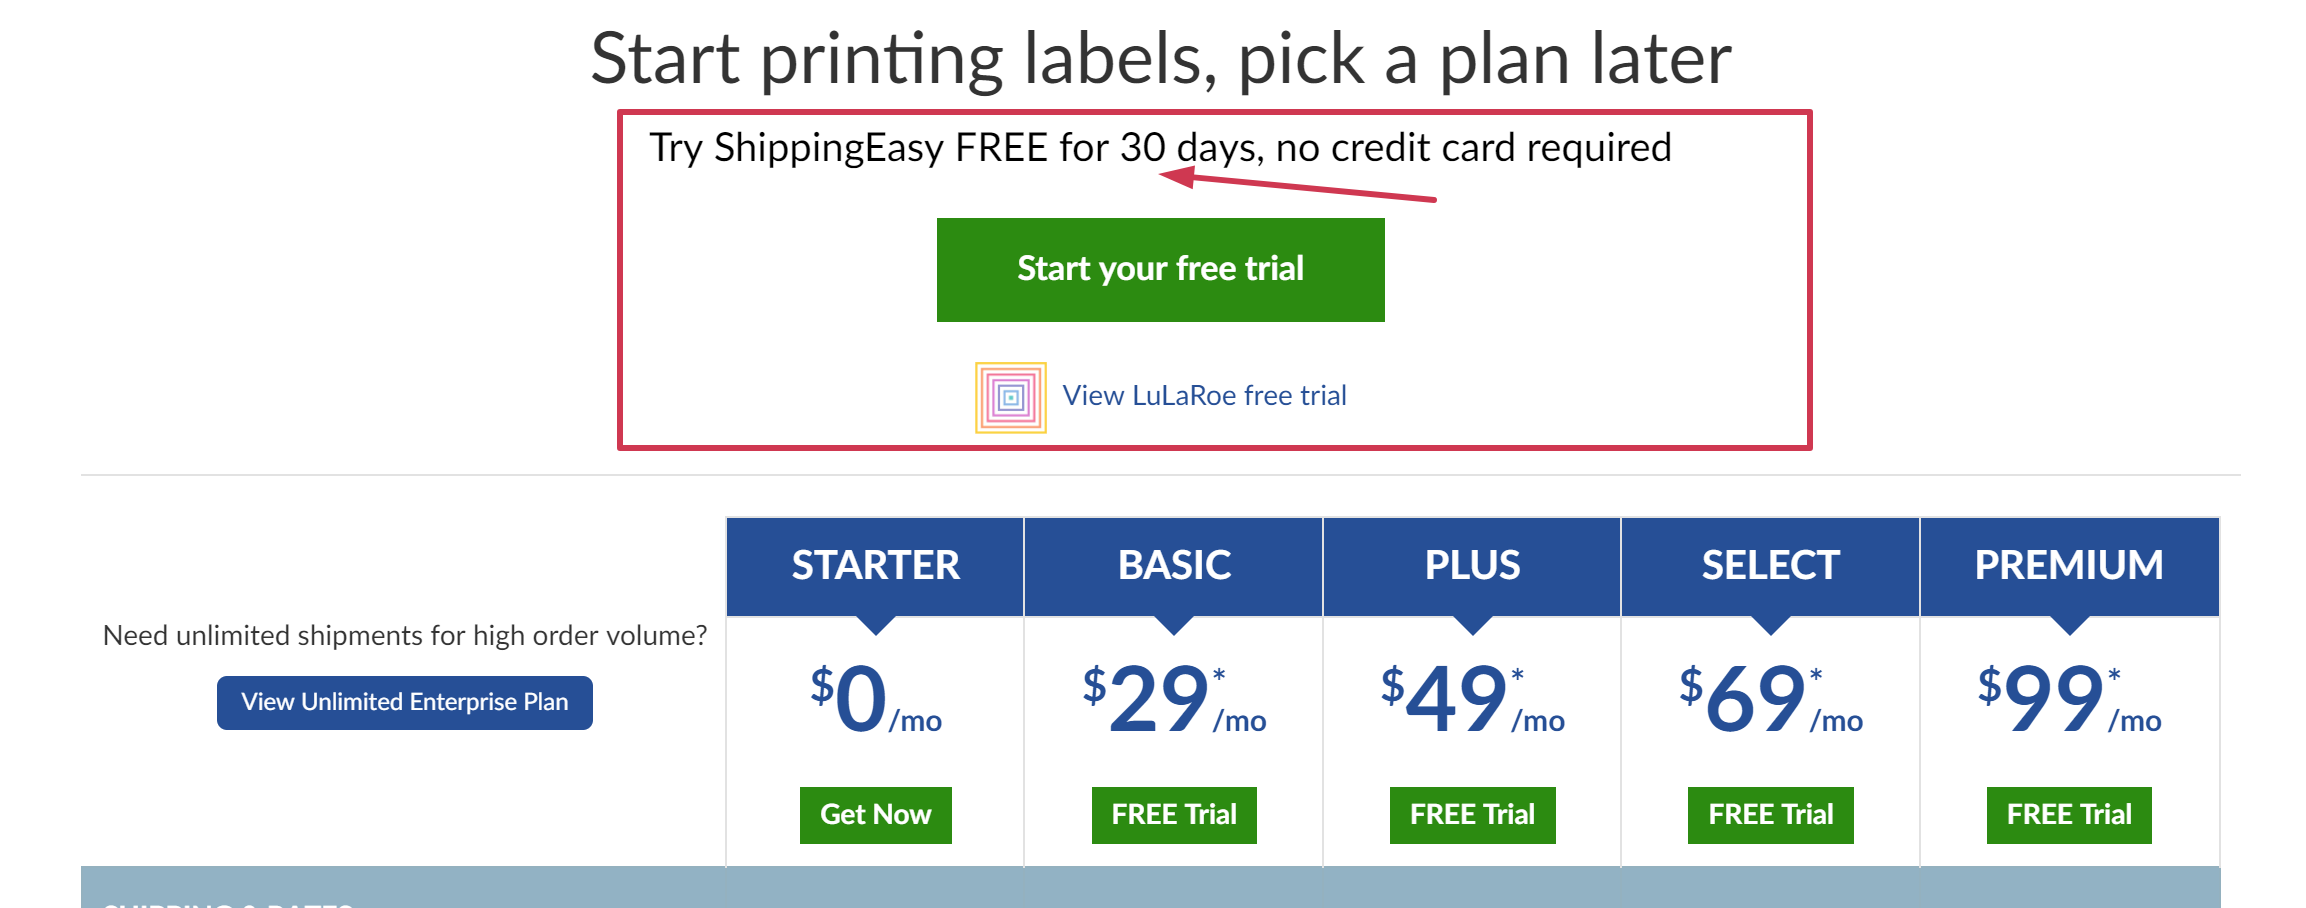 shipping easy review shipping easy discount coupon